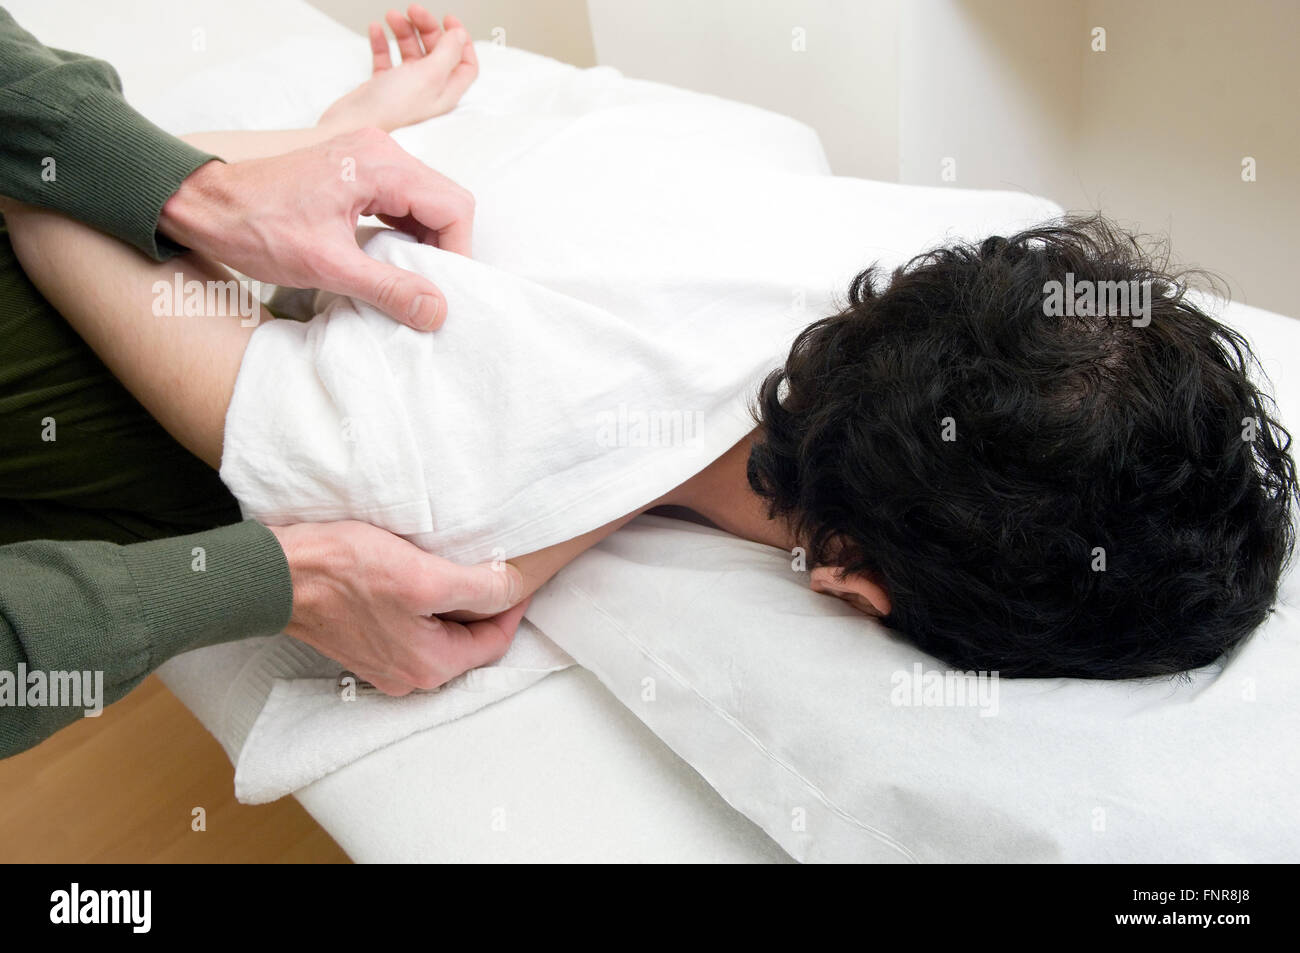 Wrapping patients in lots of blankets to help them sweat is an important part of acupuncture treatment for body aches and colds. Stock Photo